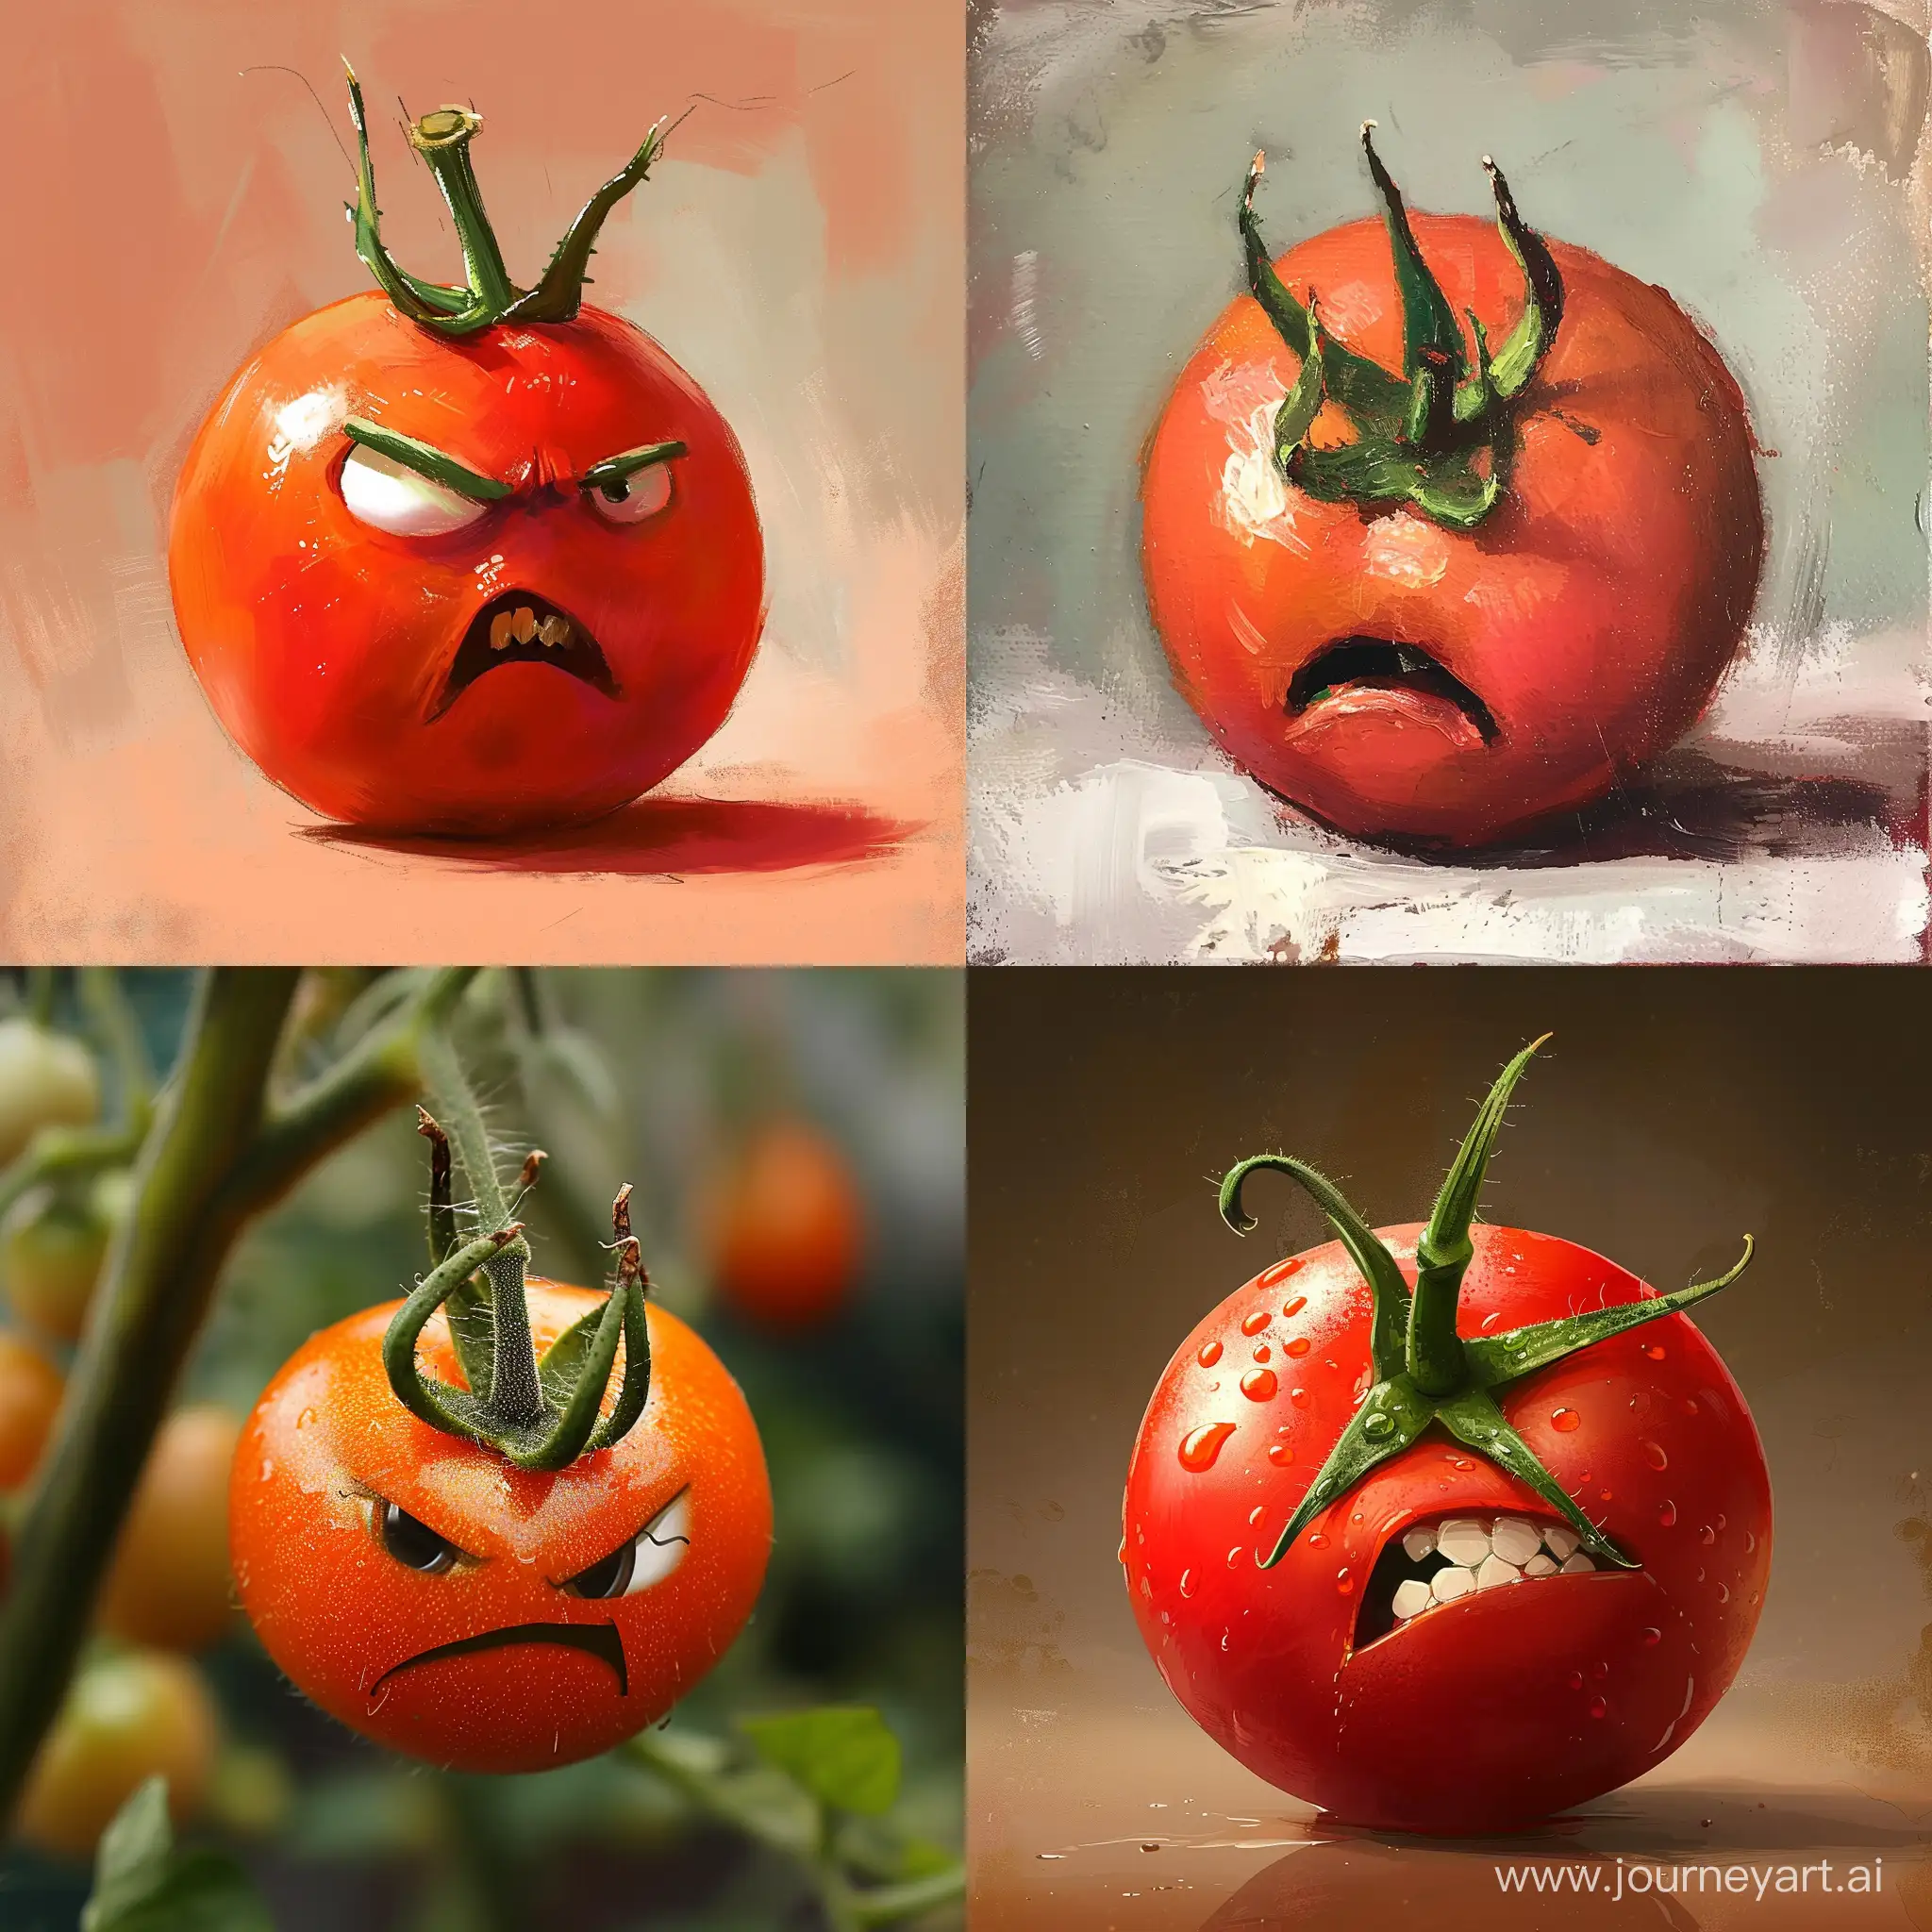 Vibrant-Angry-Tomato-Illustration-on-Square-Canvas